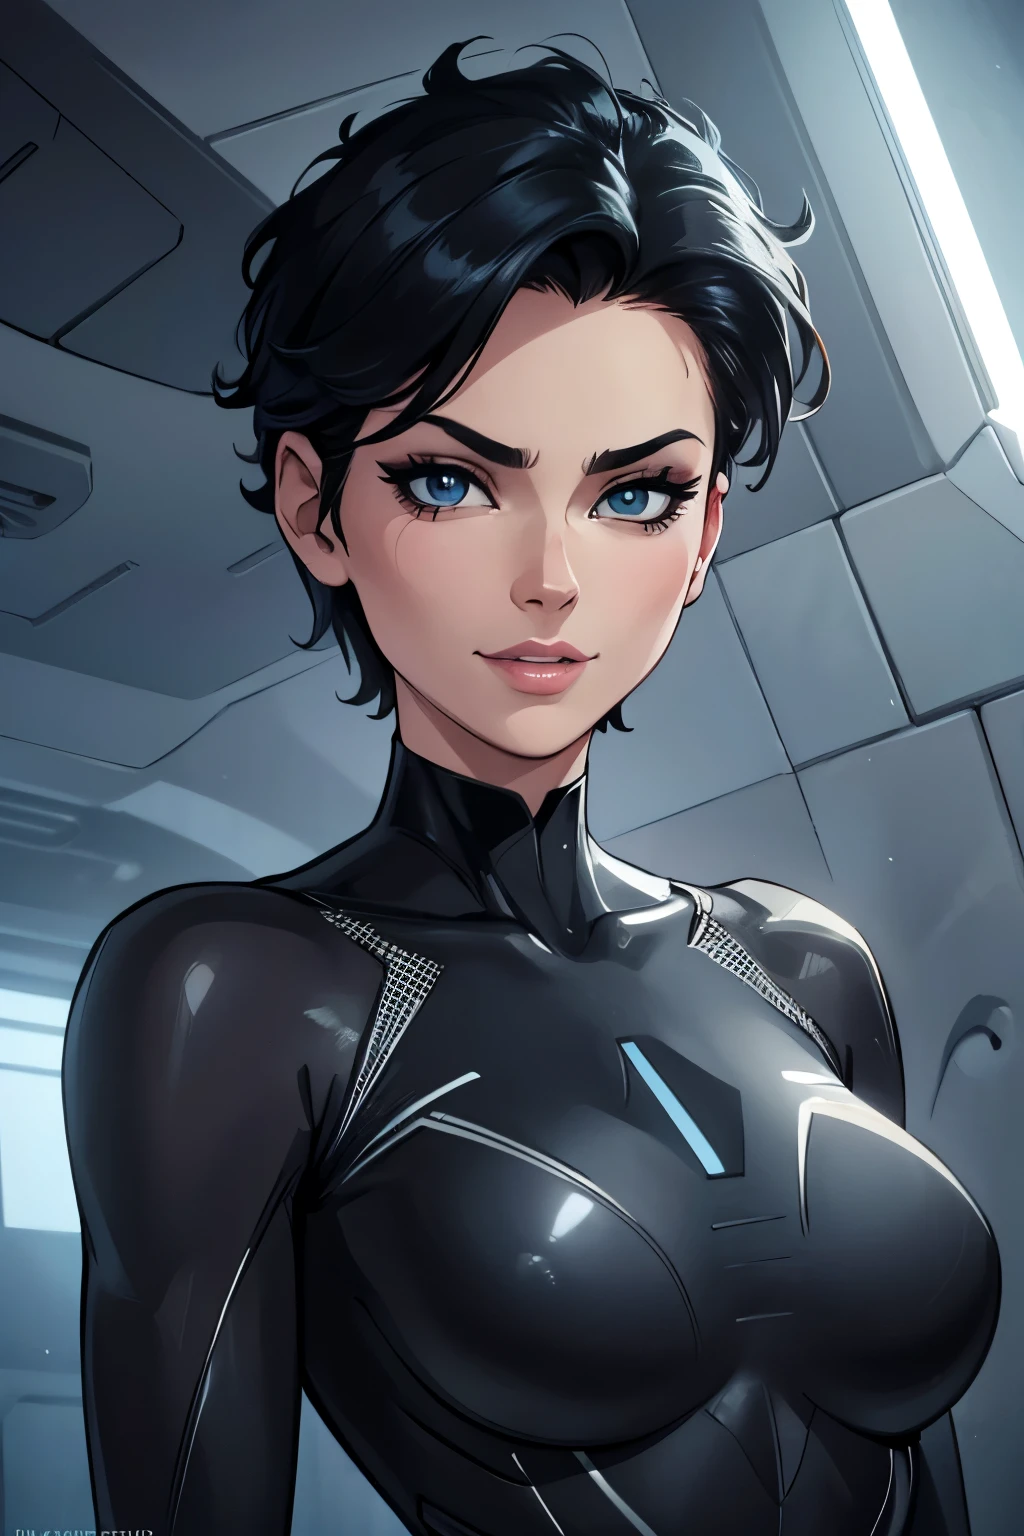 (art, Best quality, absurd, 4K, aesthetics,detailed face, perfect eyes, perfect face, detailed, complex, Perfect lighting) 1 girl with fair skin, short shaved dark hair, wears all black futuristic bodysuit, queen of an alien race, warrior, gentle smile